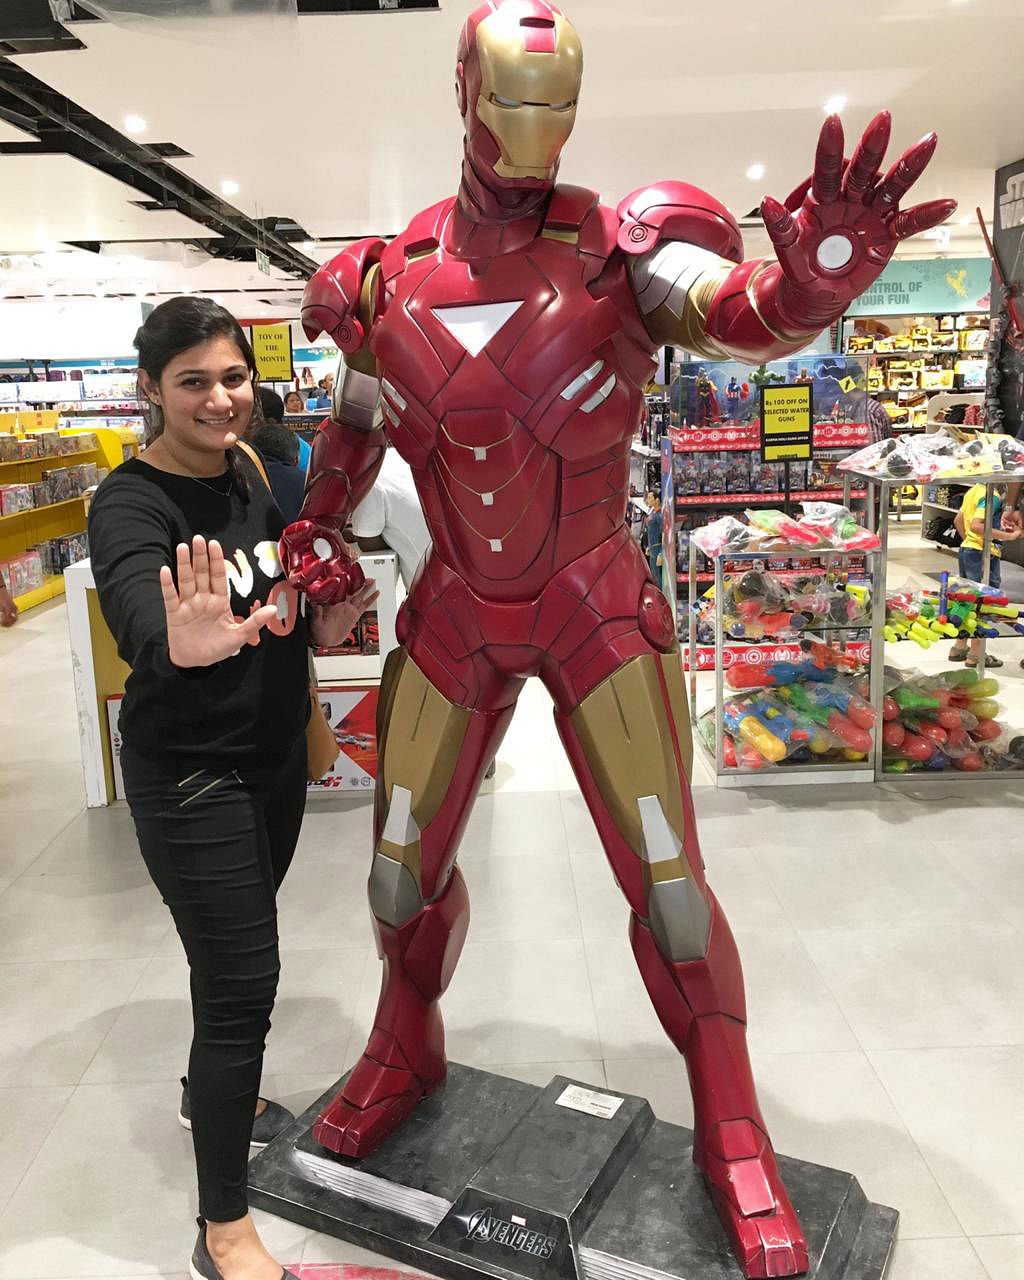 Kirthi Shenoy, Marvel fan, bought IMAX tickets for Friday.